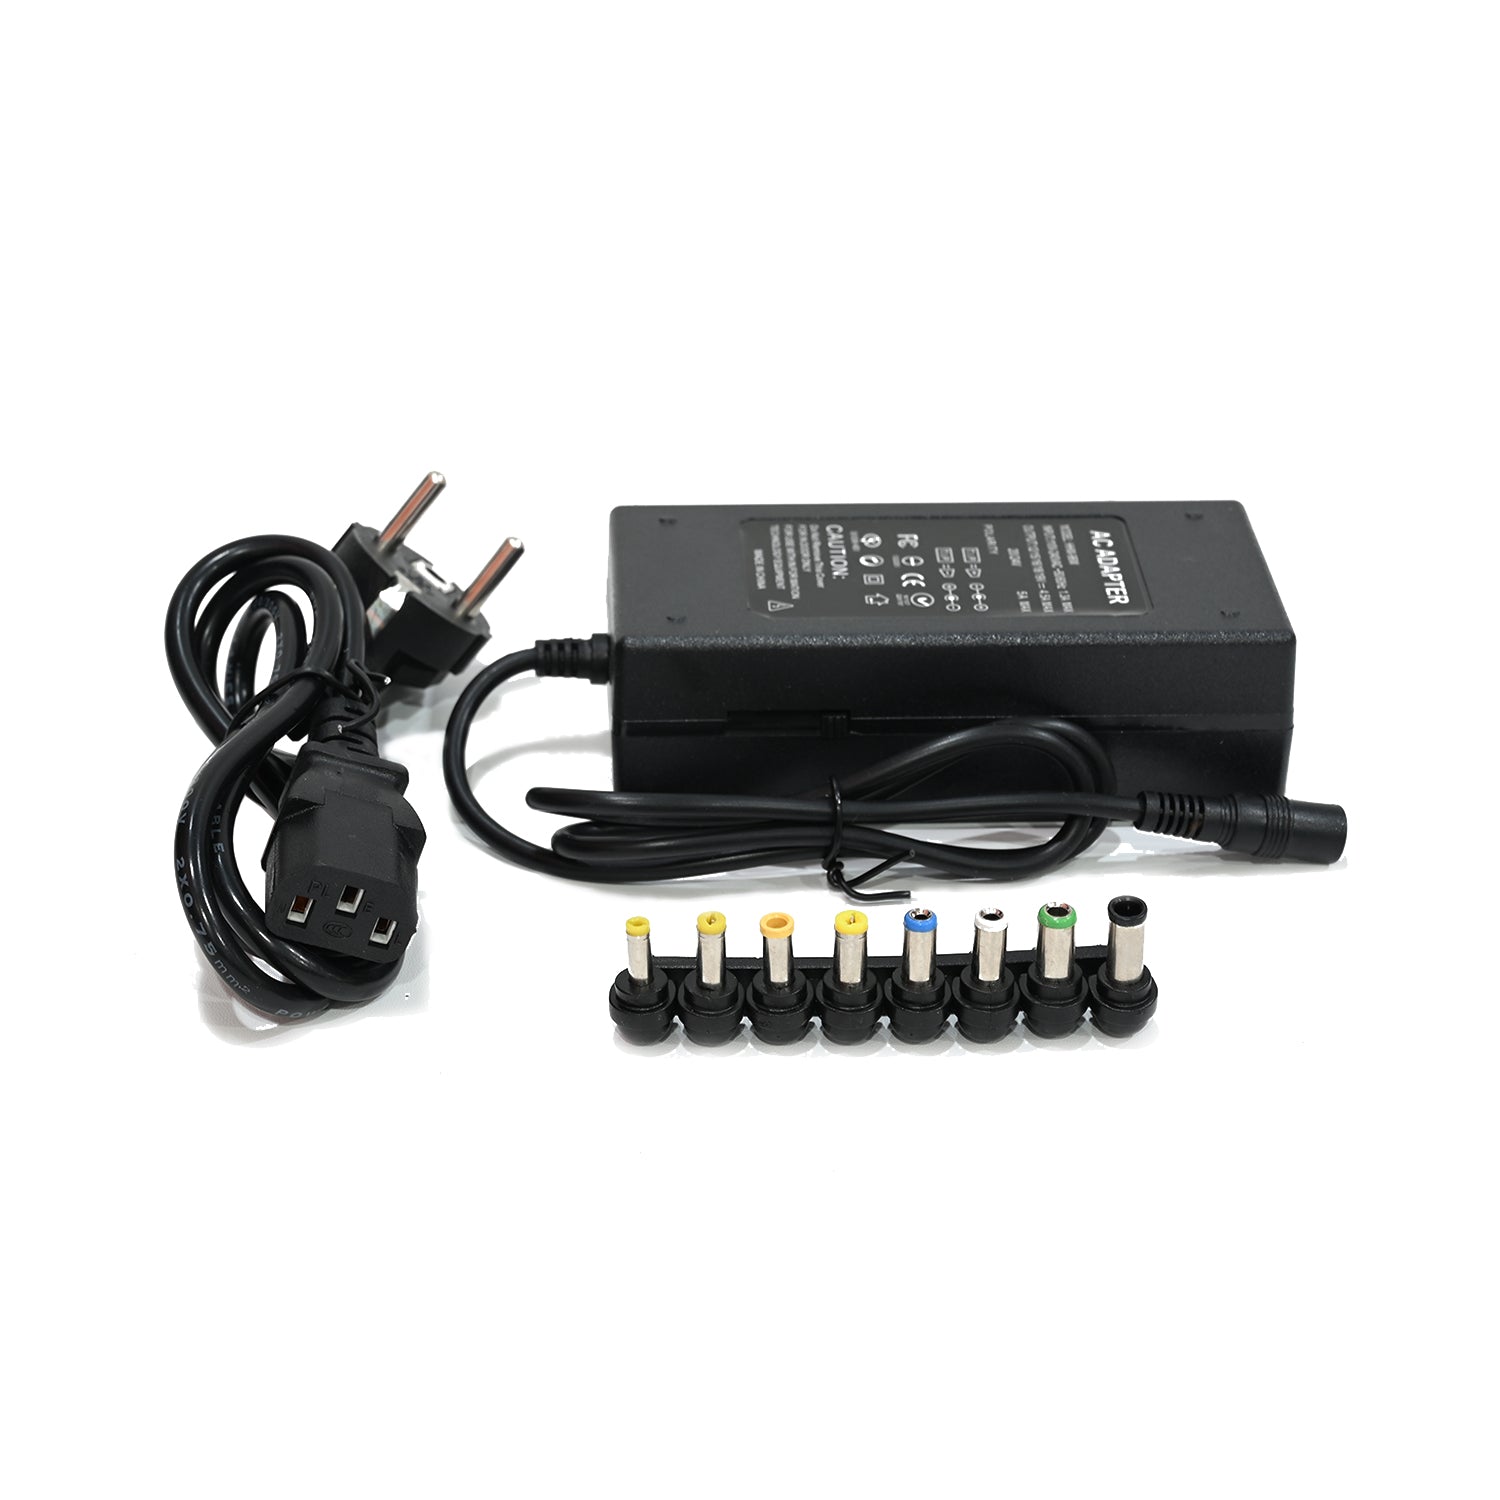 Power Adaptor Charger Universal 96W